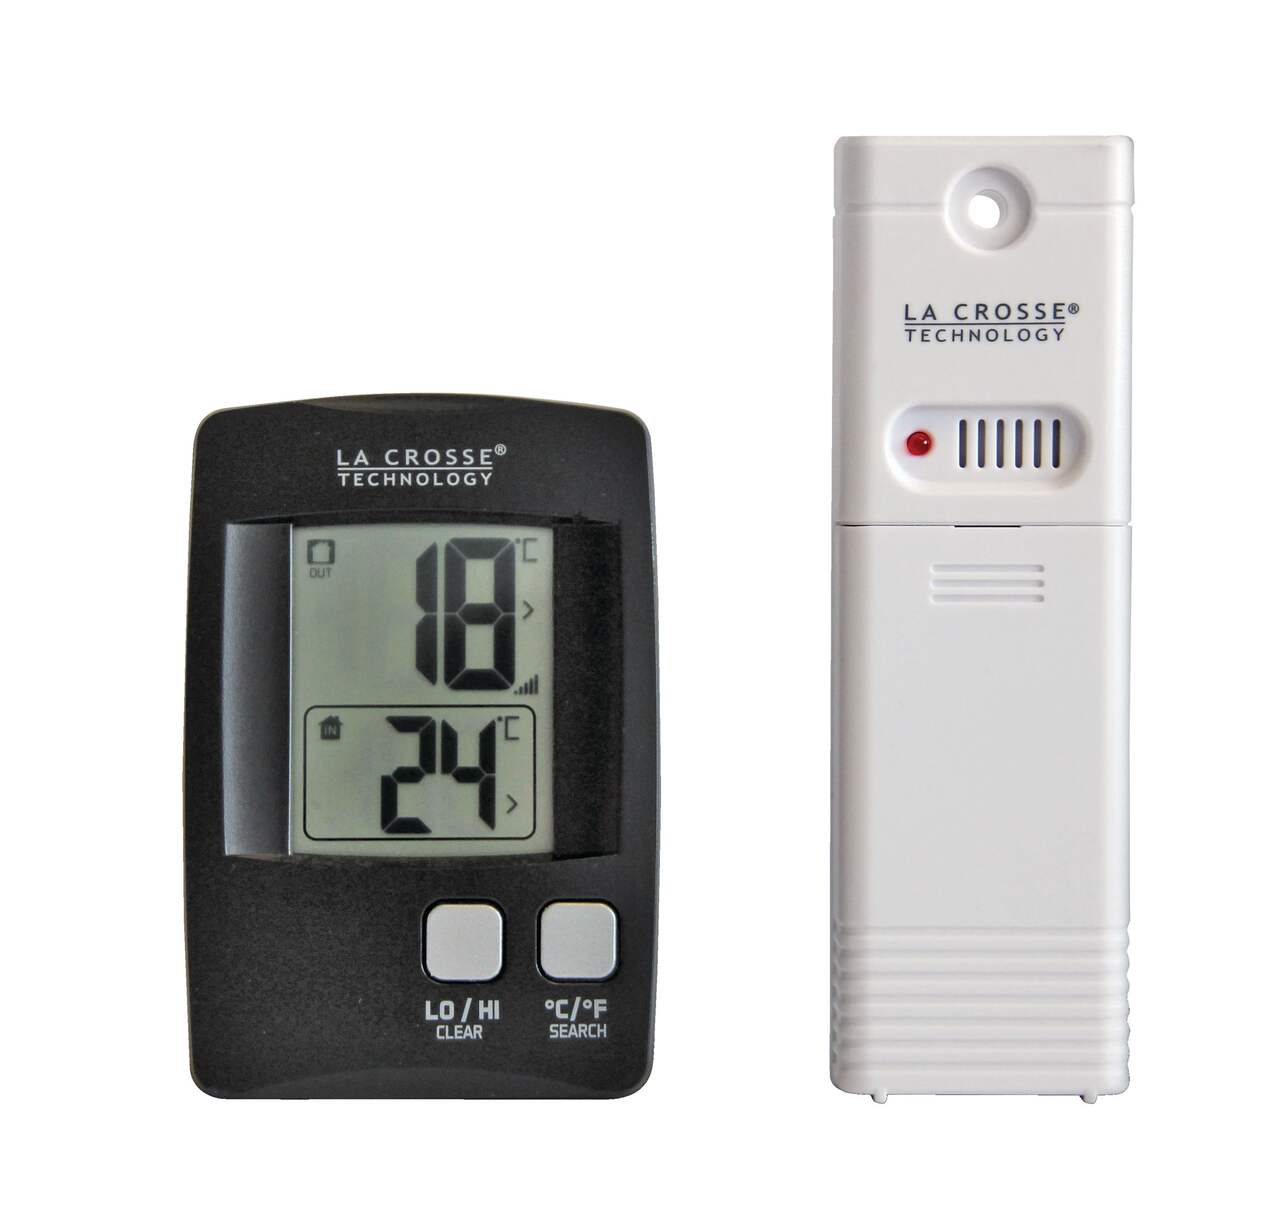 https://media-www.canadiantire.ca/product/living/kitchen/kitchen-tools-thermometers/1427129/lacrosse-wireless-temperature-station-4946ee82-eda5-4f76-ae70-31cdc1b651a9-jpgrendition.jpg?imdensity=1&imwidth=640&impolicy=mZoom